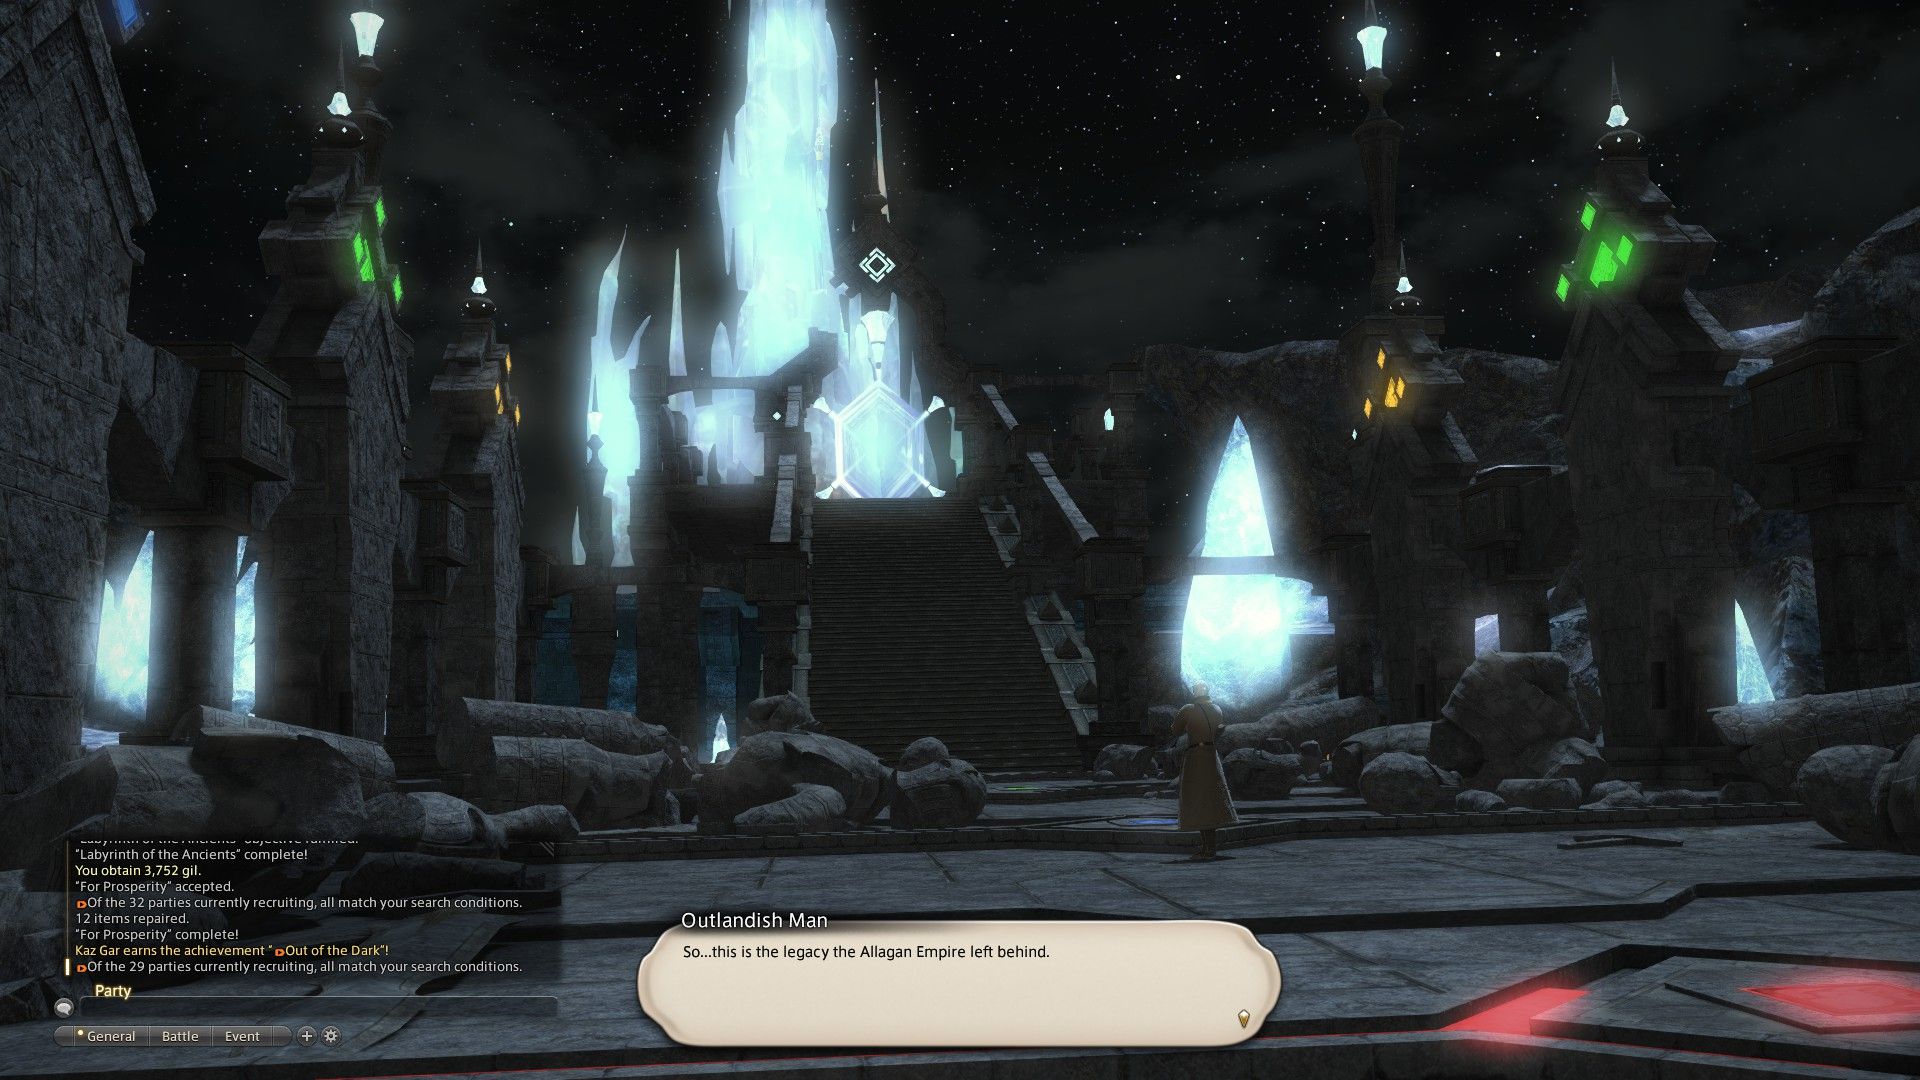 ff14 - nero looking up at the crystal tower